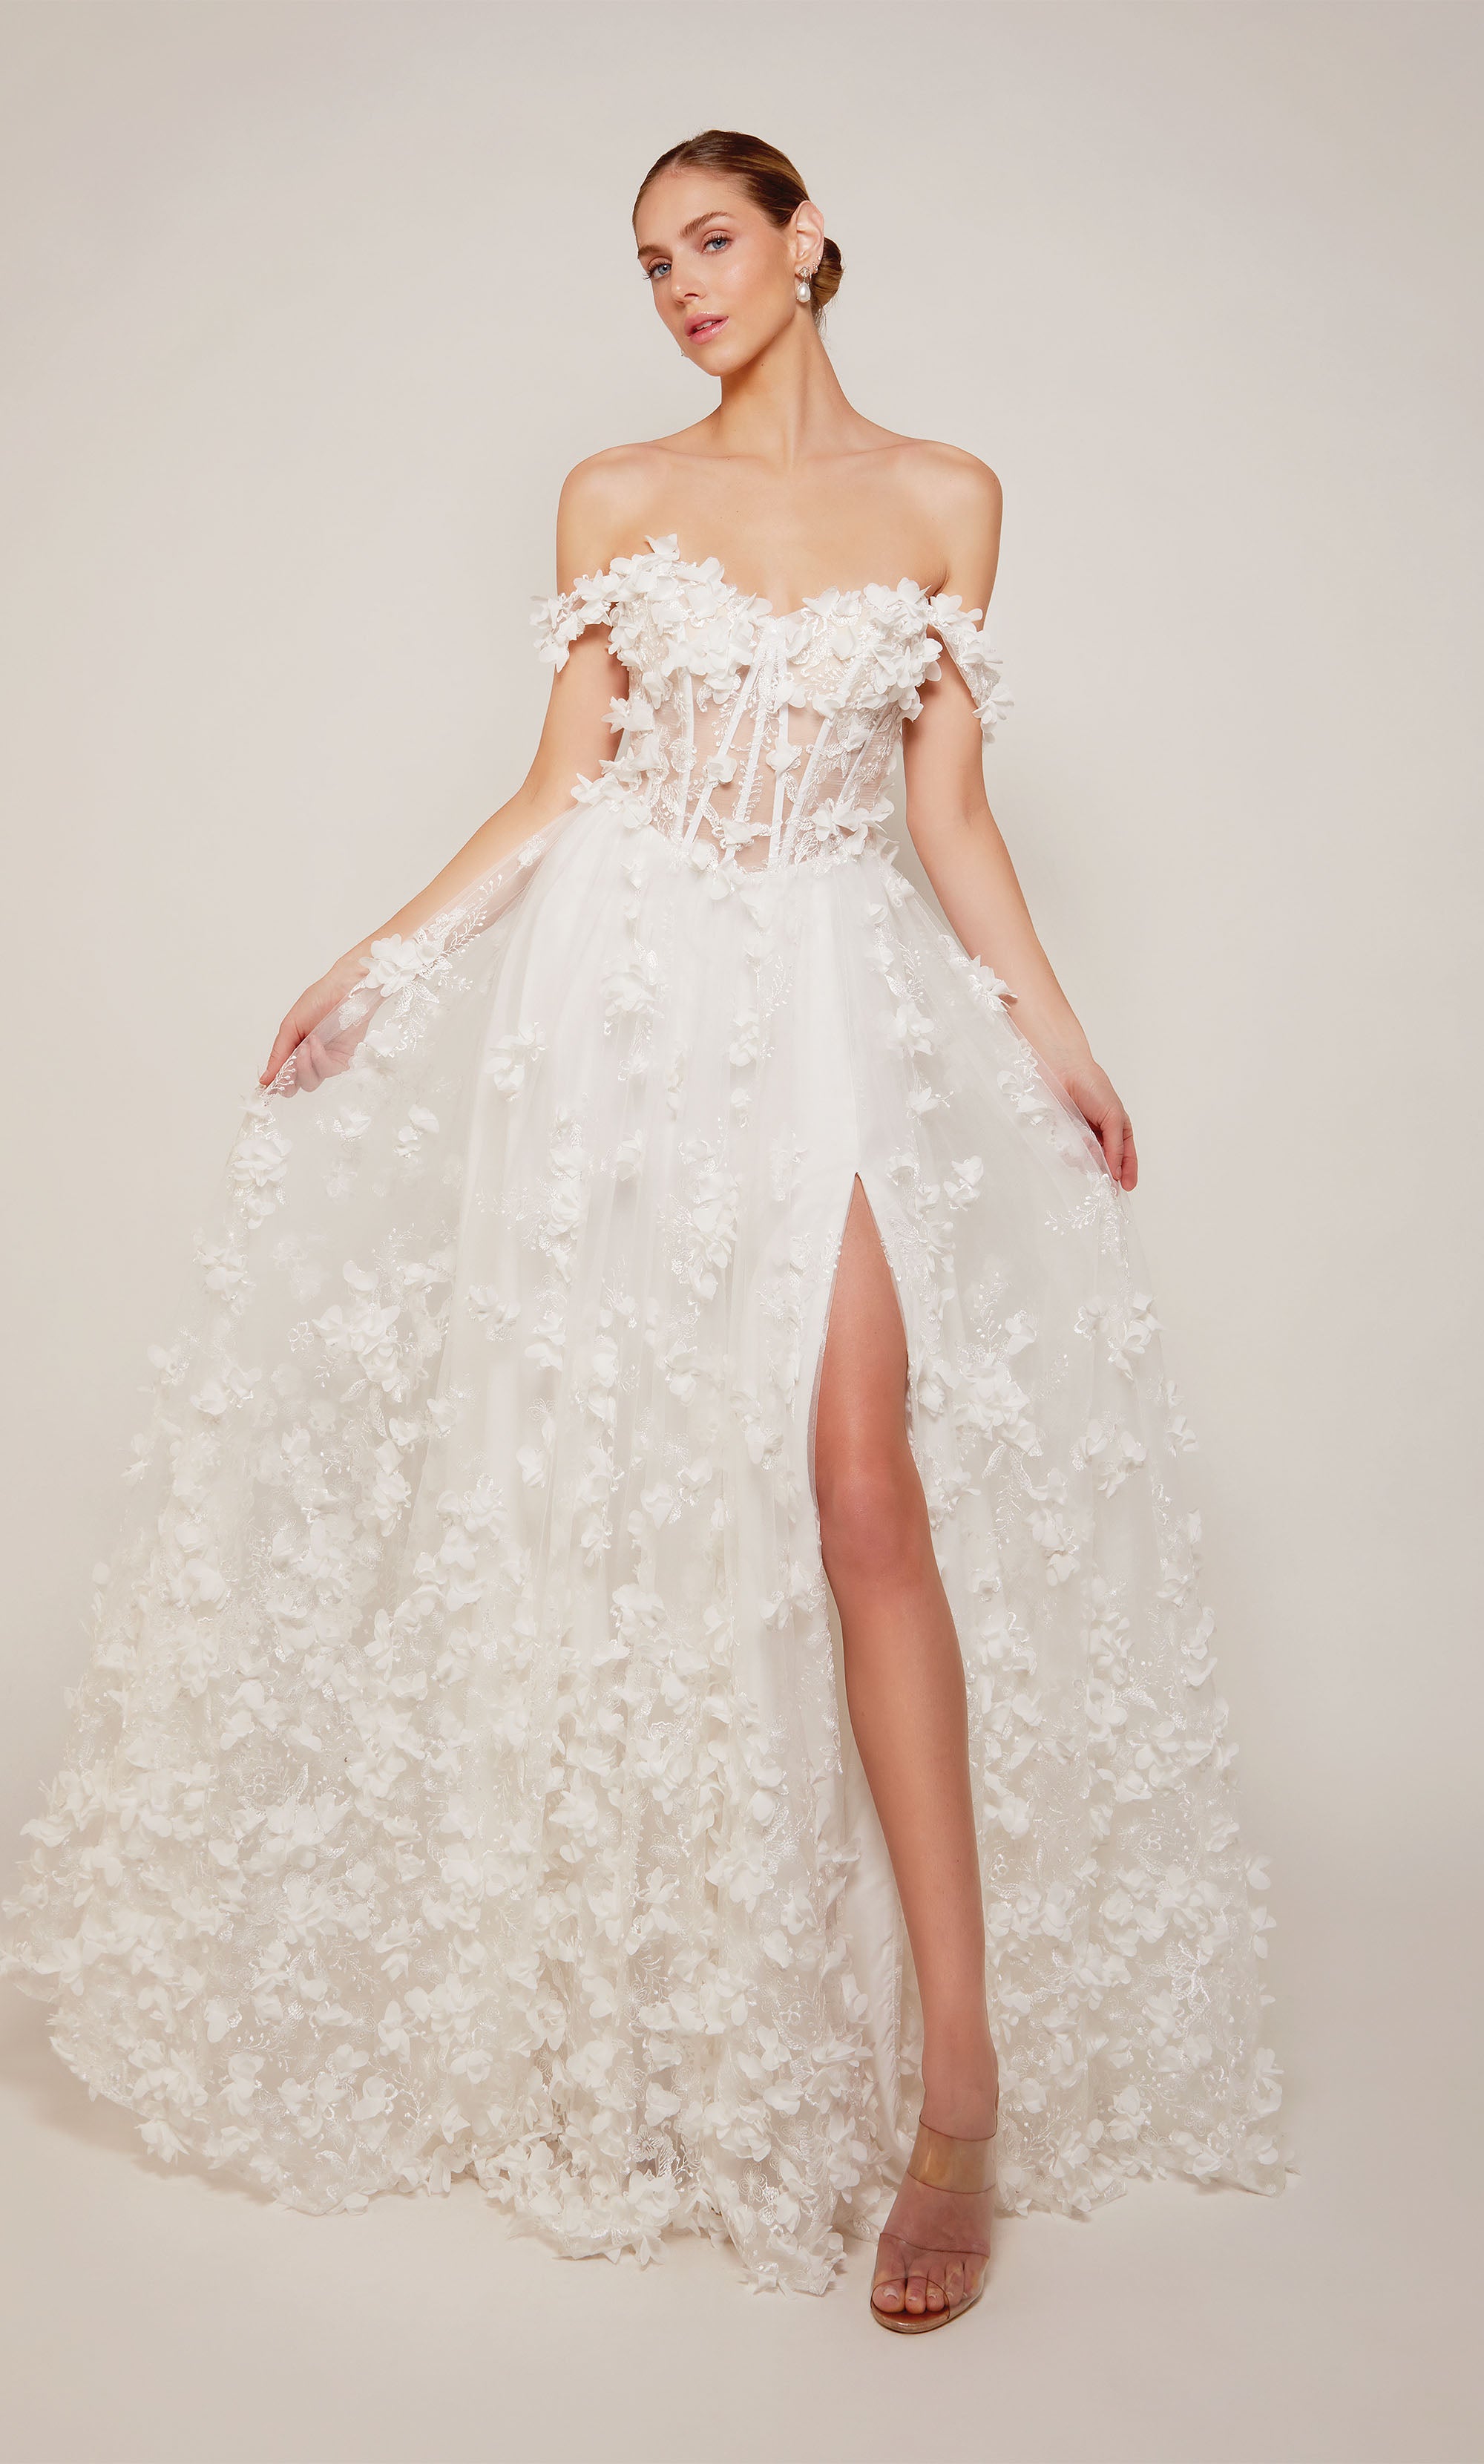 White off the shoulder a-line wedding dresses,short homecoming